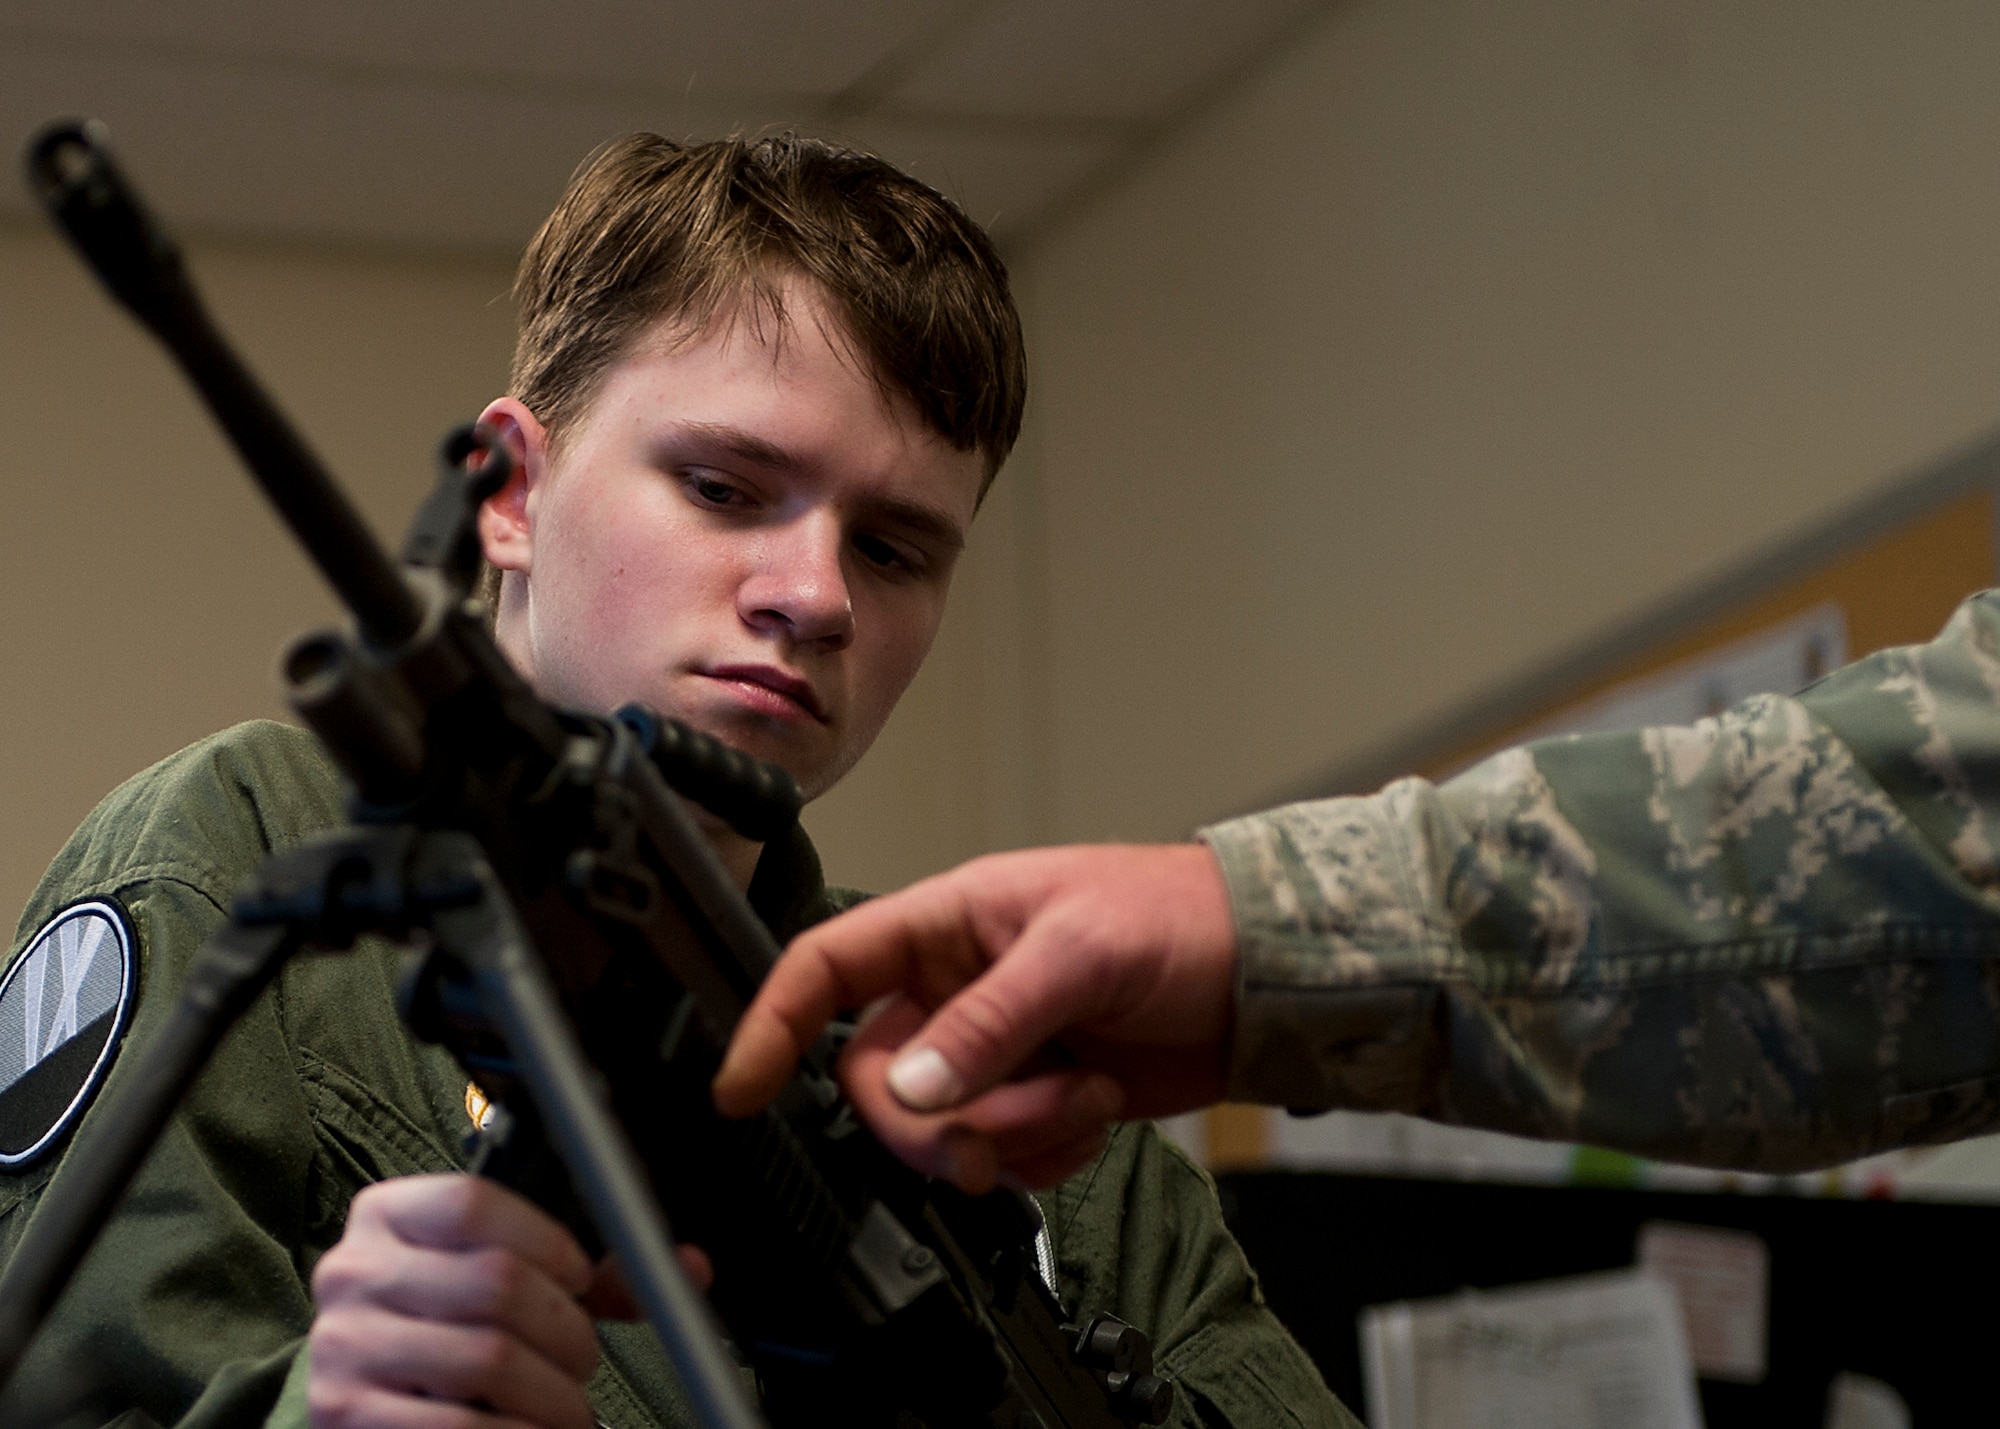 Keegan Vowell, 16-year-old Abilene resident, holds a M249 during a “Pilot for a Day” tour Jan. 14, 2013, at Dyess Air Force Base, Texas. As part of the program, Keegan received his own flight suit, was demonstrated the capabilities of the 7th Security Forces K-9 Unit, toured the air traffic control tower, taxied a bomber, had his name put onto an aircraft, created his own Hollywood explosion with the 7th Civil Engineer Squadron Explosive Ordinance Disposal Unit and was presented a coin from the base commander. (U.S. Air Force photo by Airman 1st Class Damon Kasberg/ Released)